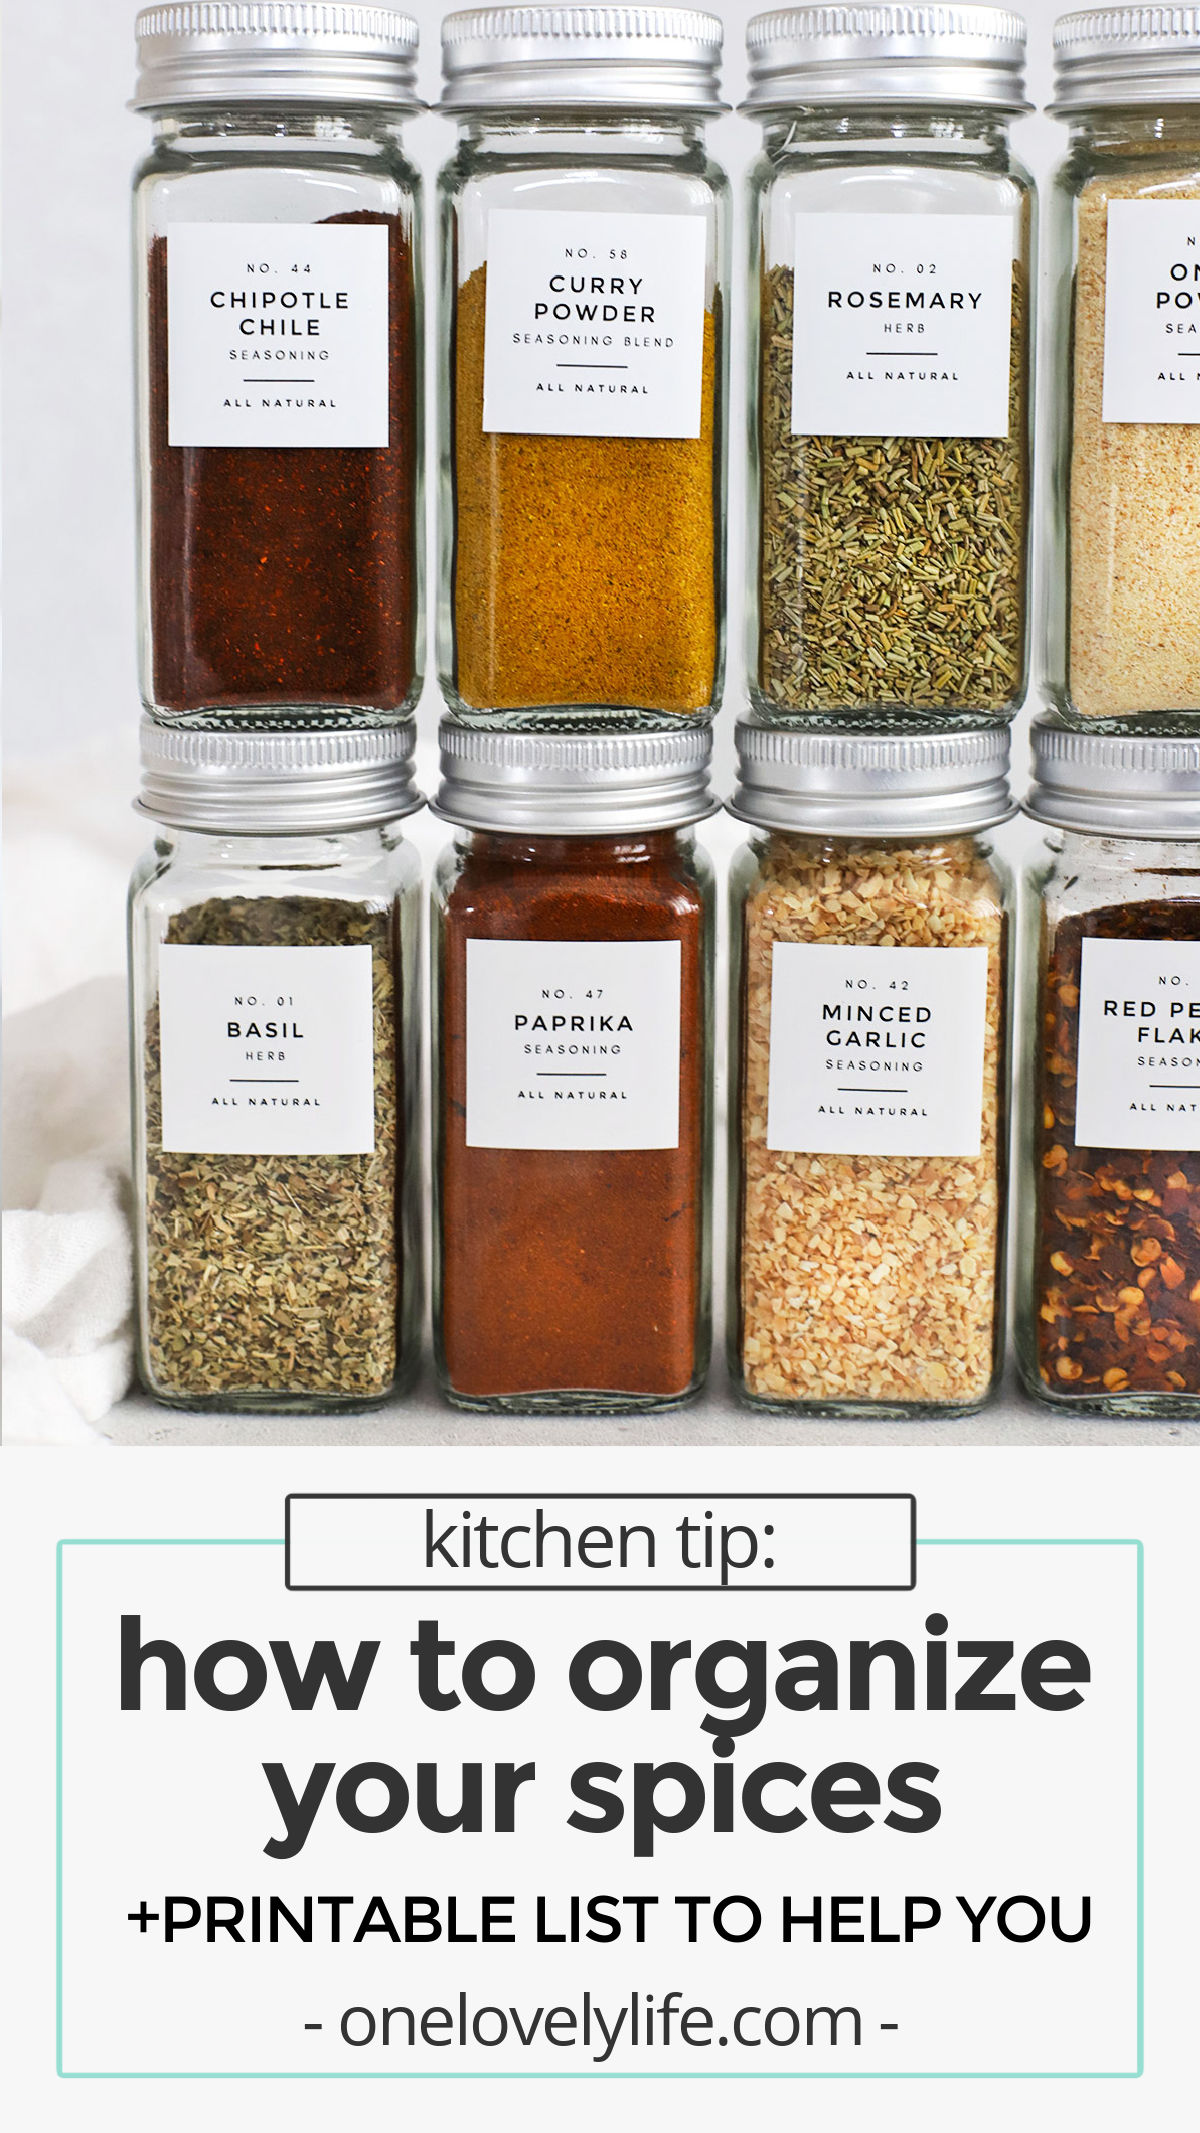 Spice Organization - Here's how we declutter and organize our spices and seasonings. Don't miss our printable list of herbs and spices to help you update your spice cupboard or add flavor to your meals. // printable list of spices and herbs // common herbs and spices // spice jar organization / spice cupboard organization / kitchen organization / how to organize spices / how to organize spice jars / kitchen decluttering / spice jar labels /